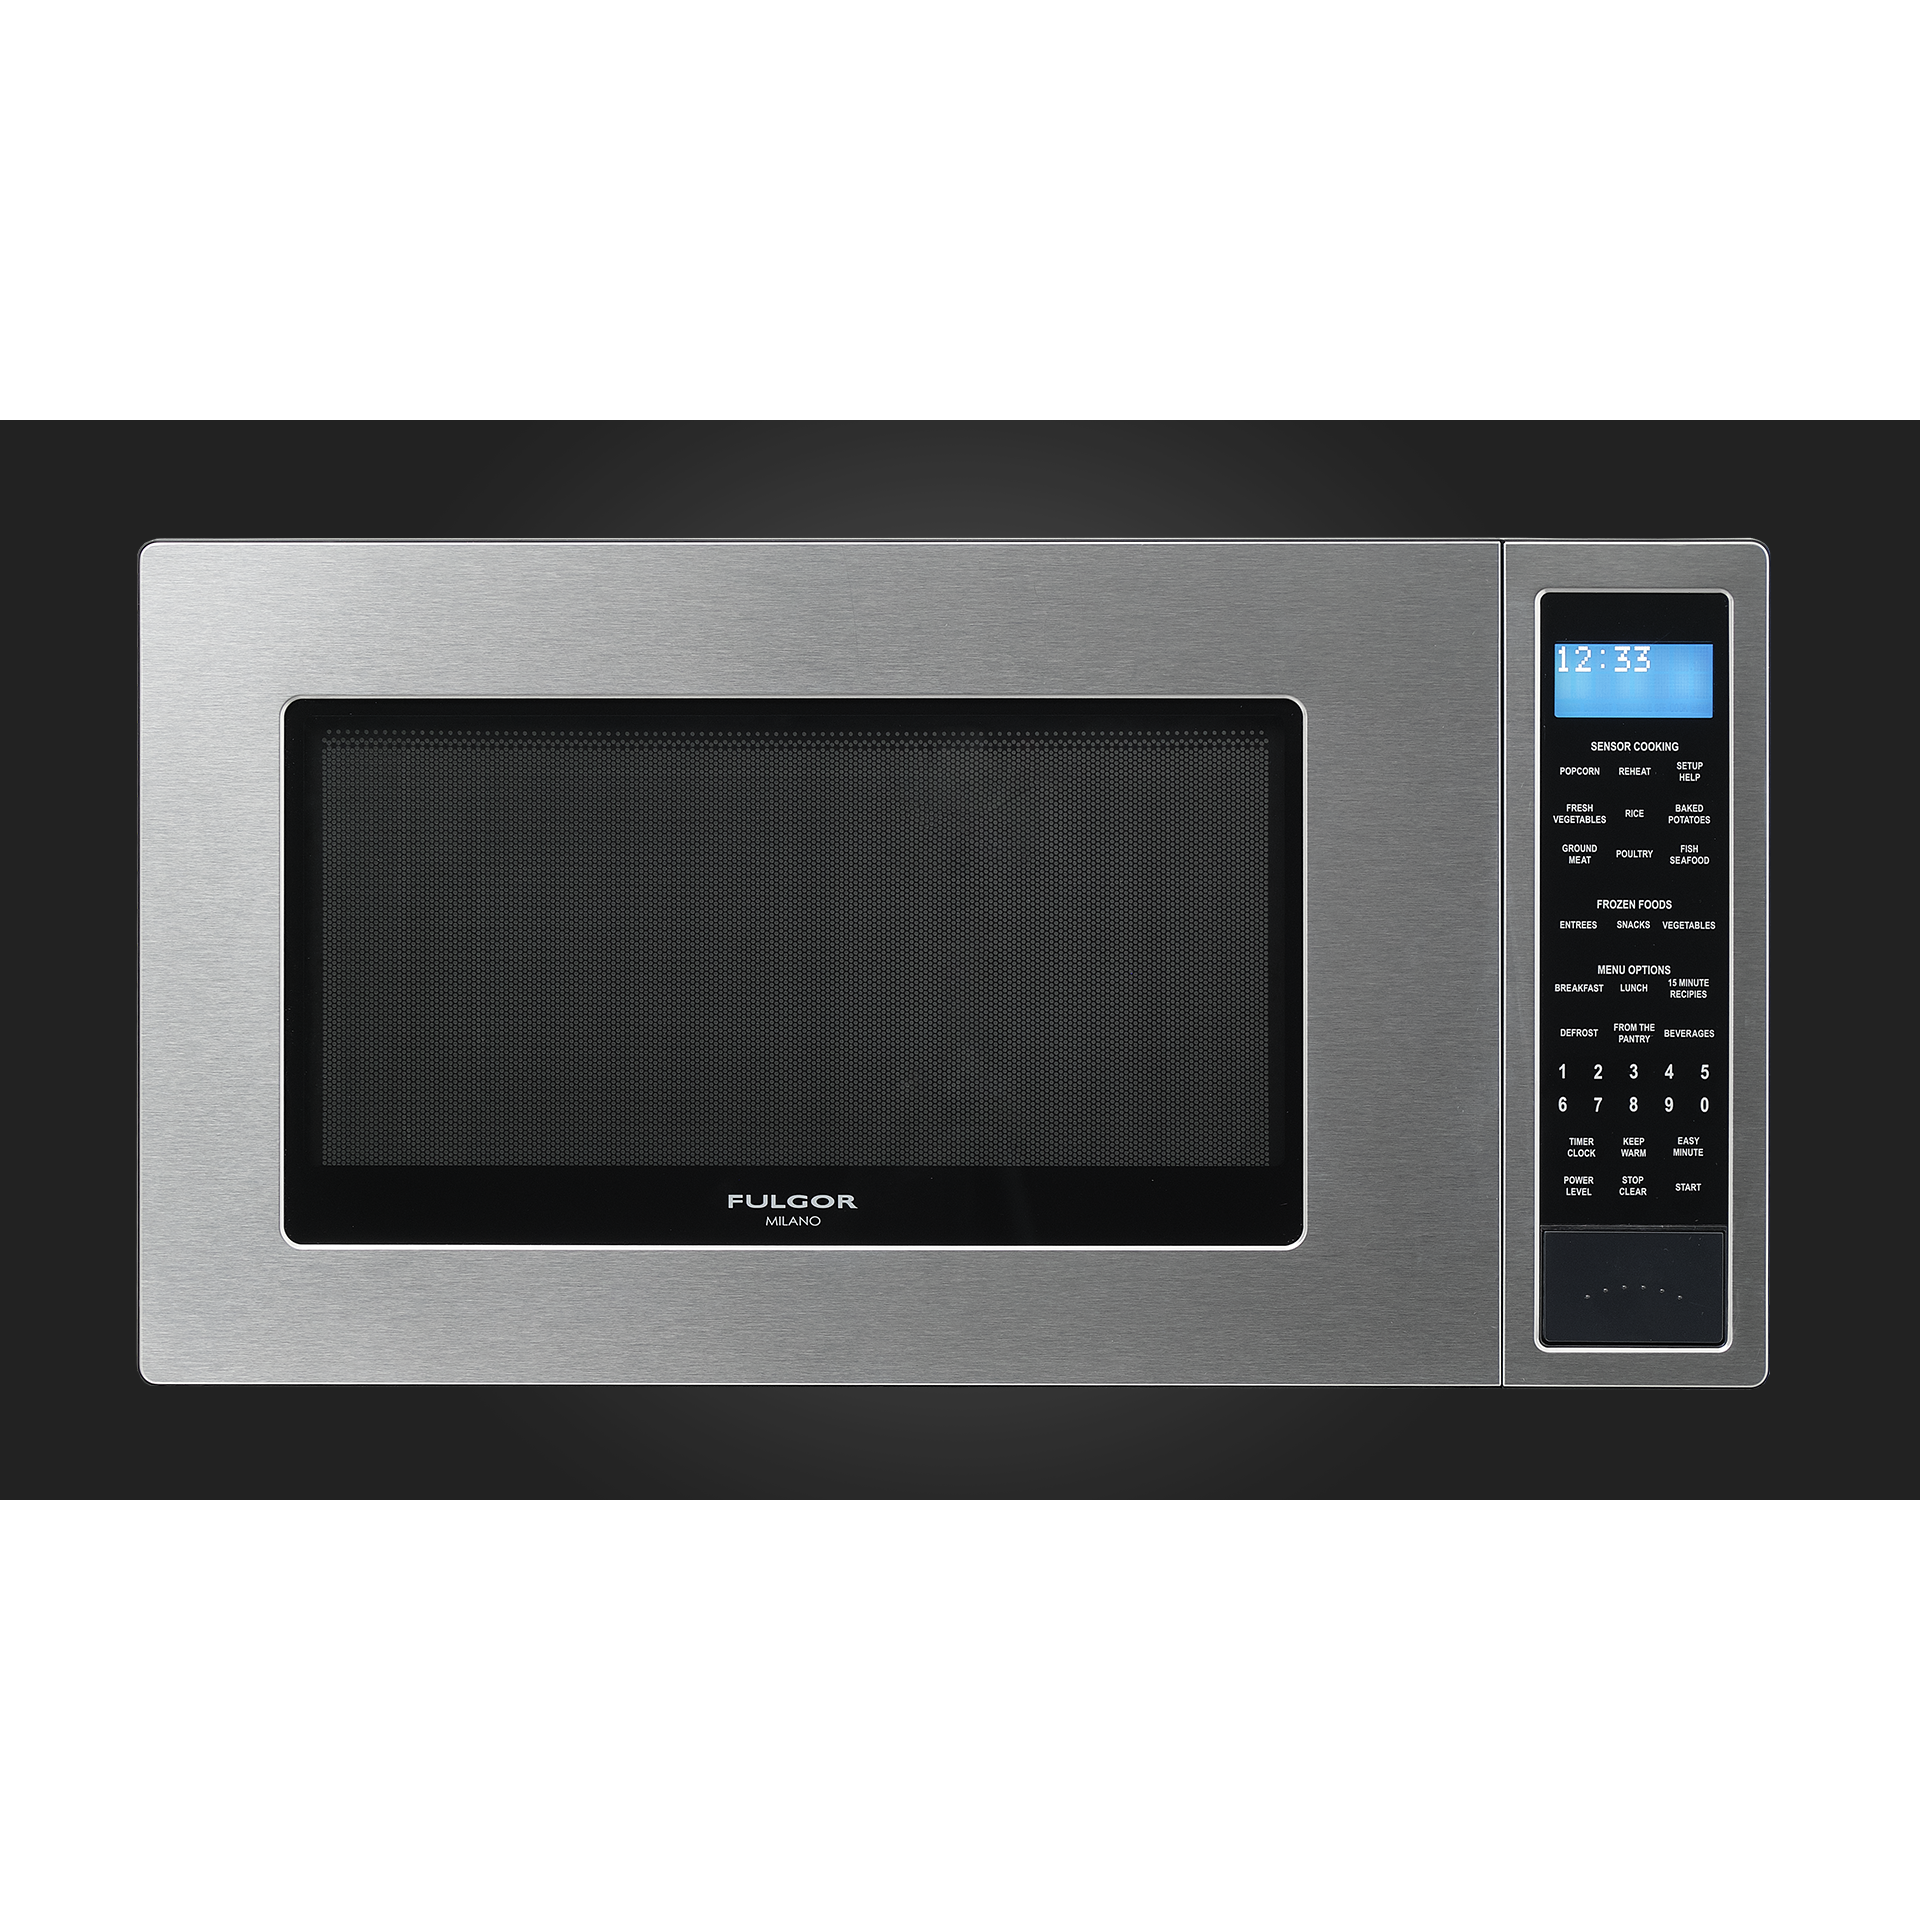 Fulgor Milano 24" Countertop Microwave Oven with 2.0 Cu. Ft. Capacity, Stainless Steel - F4MWO24S1